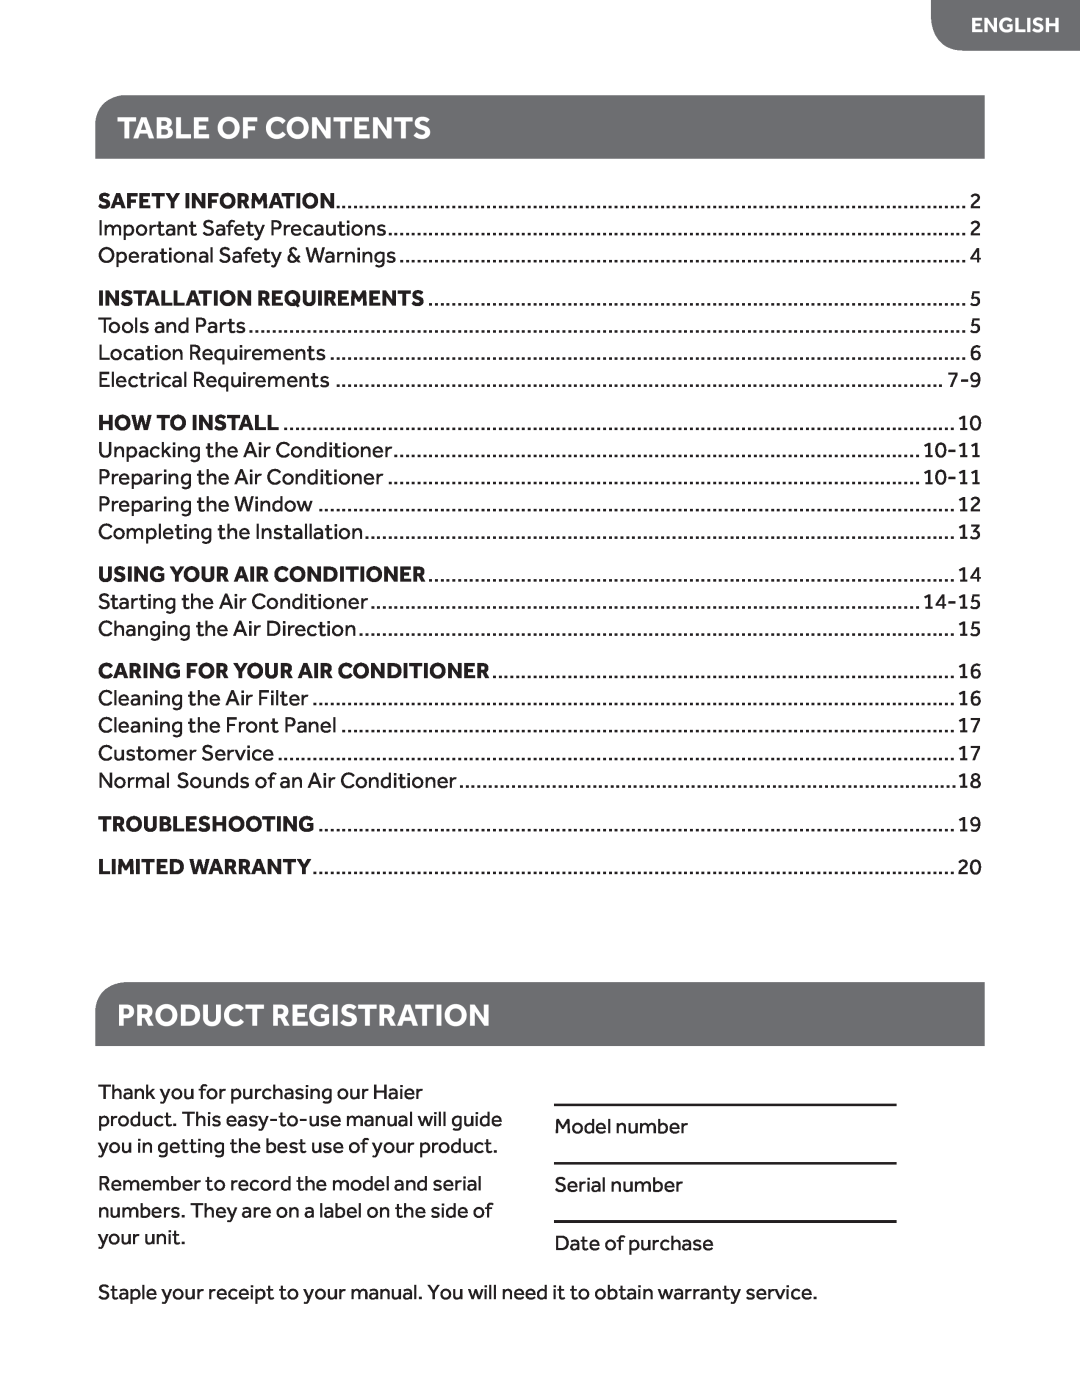 Haier HWF05XCL manual Table Of Contents, Product Registration, English 